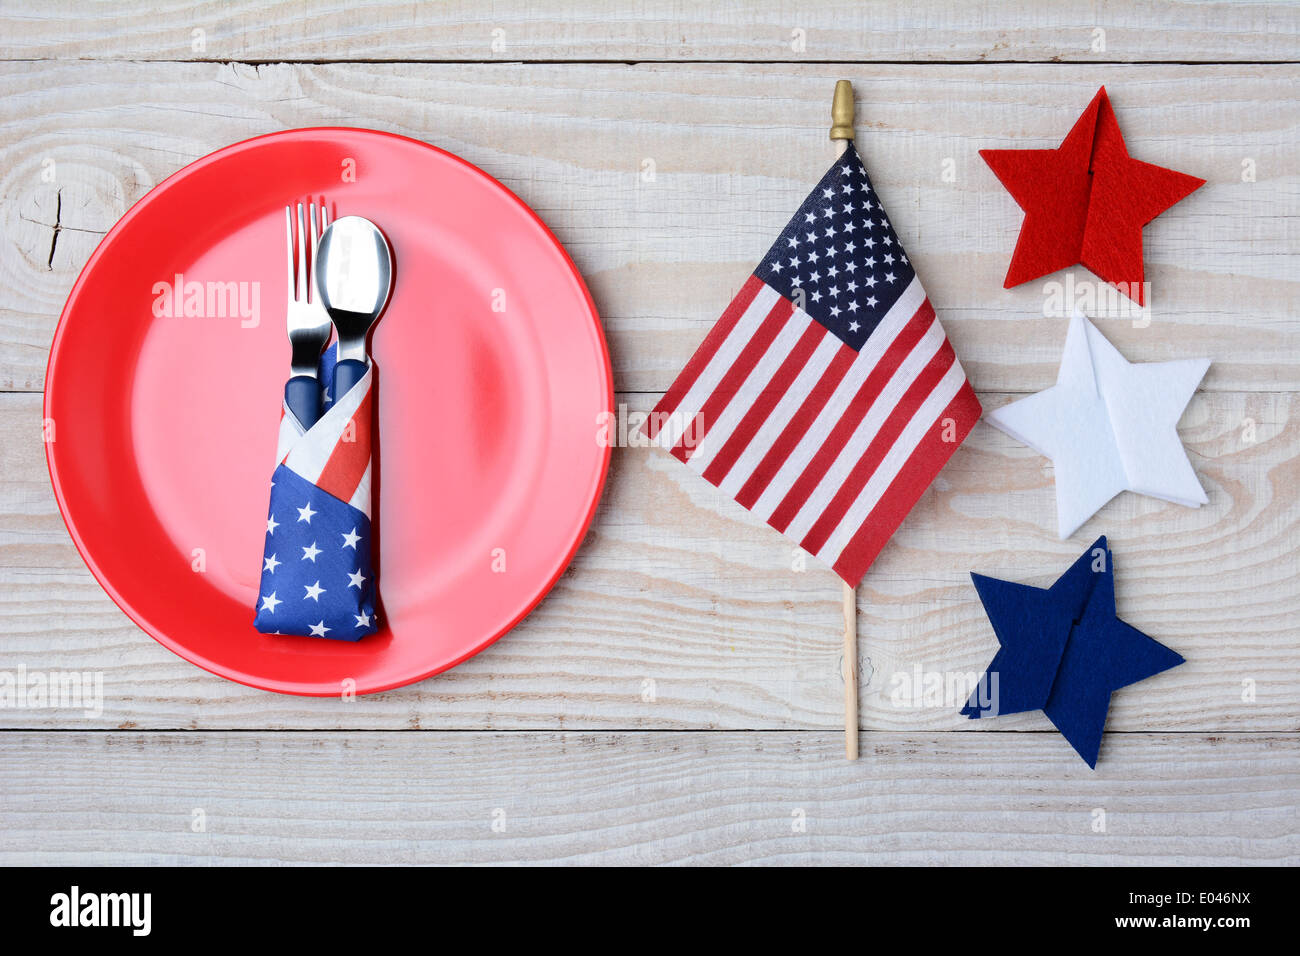 A picnic table ready for a 4th of July picnic. A red plate with fork and spoon, American Flag and felt stars decorate the table. Stock Photo